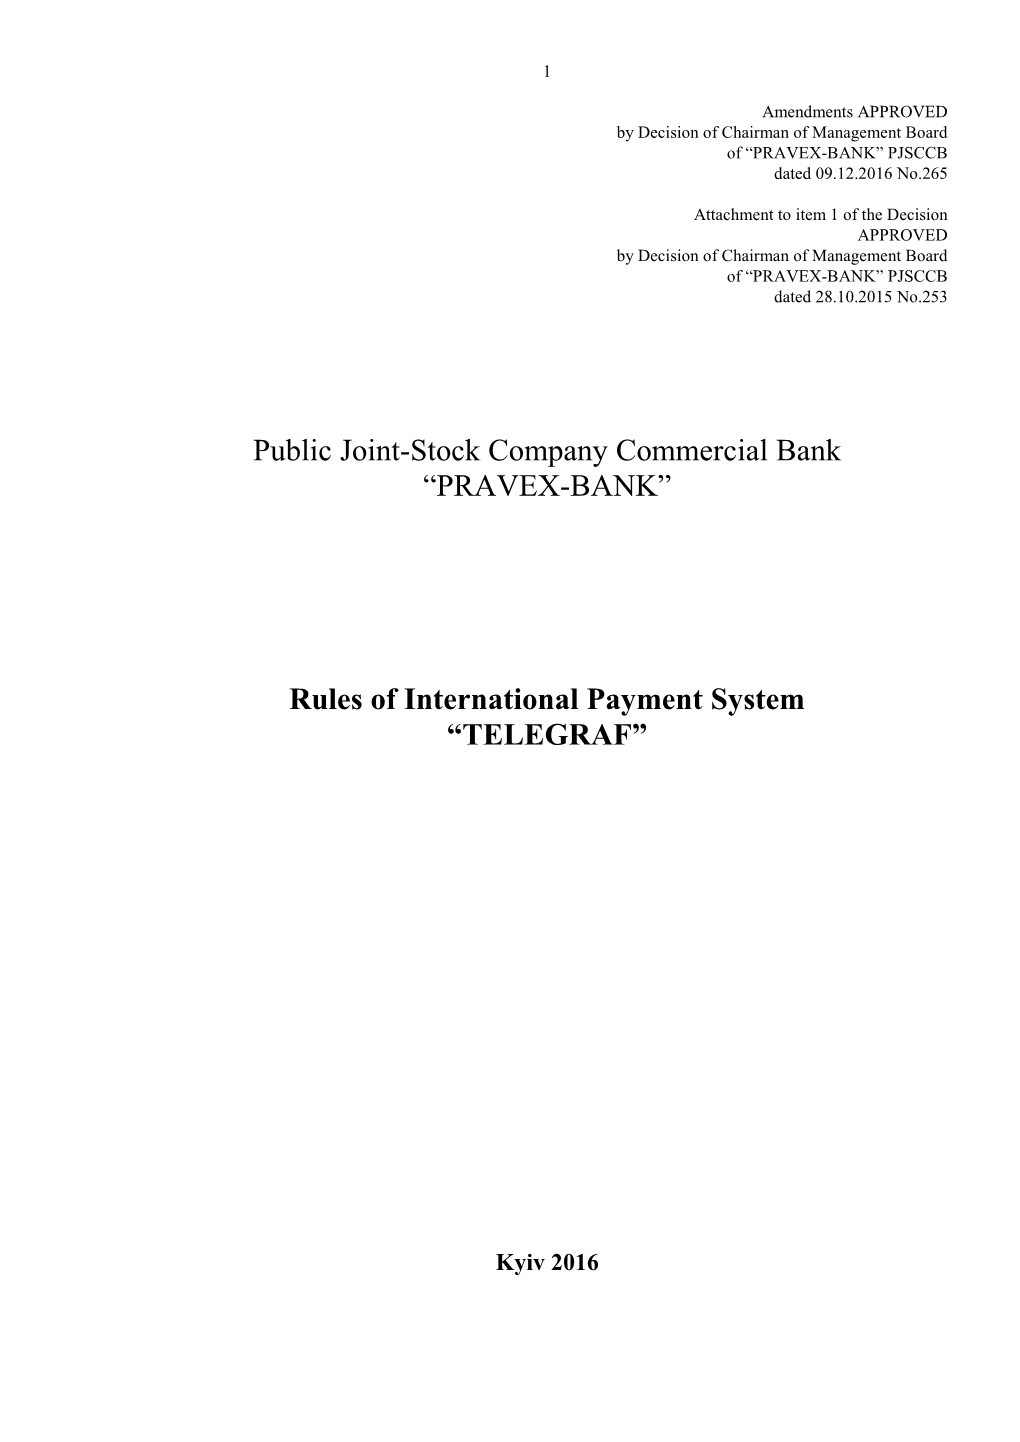 “PRAVEX-BANK” Rules of International Payment System